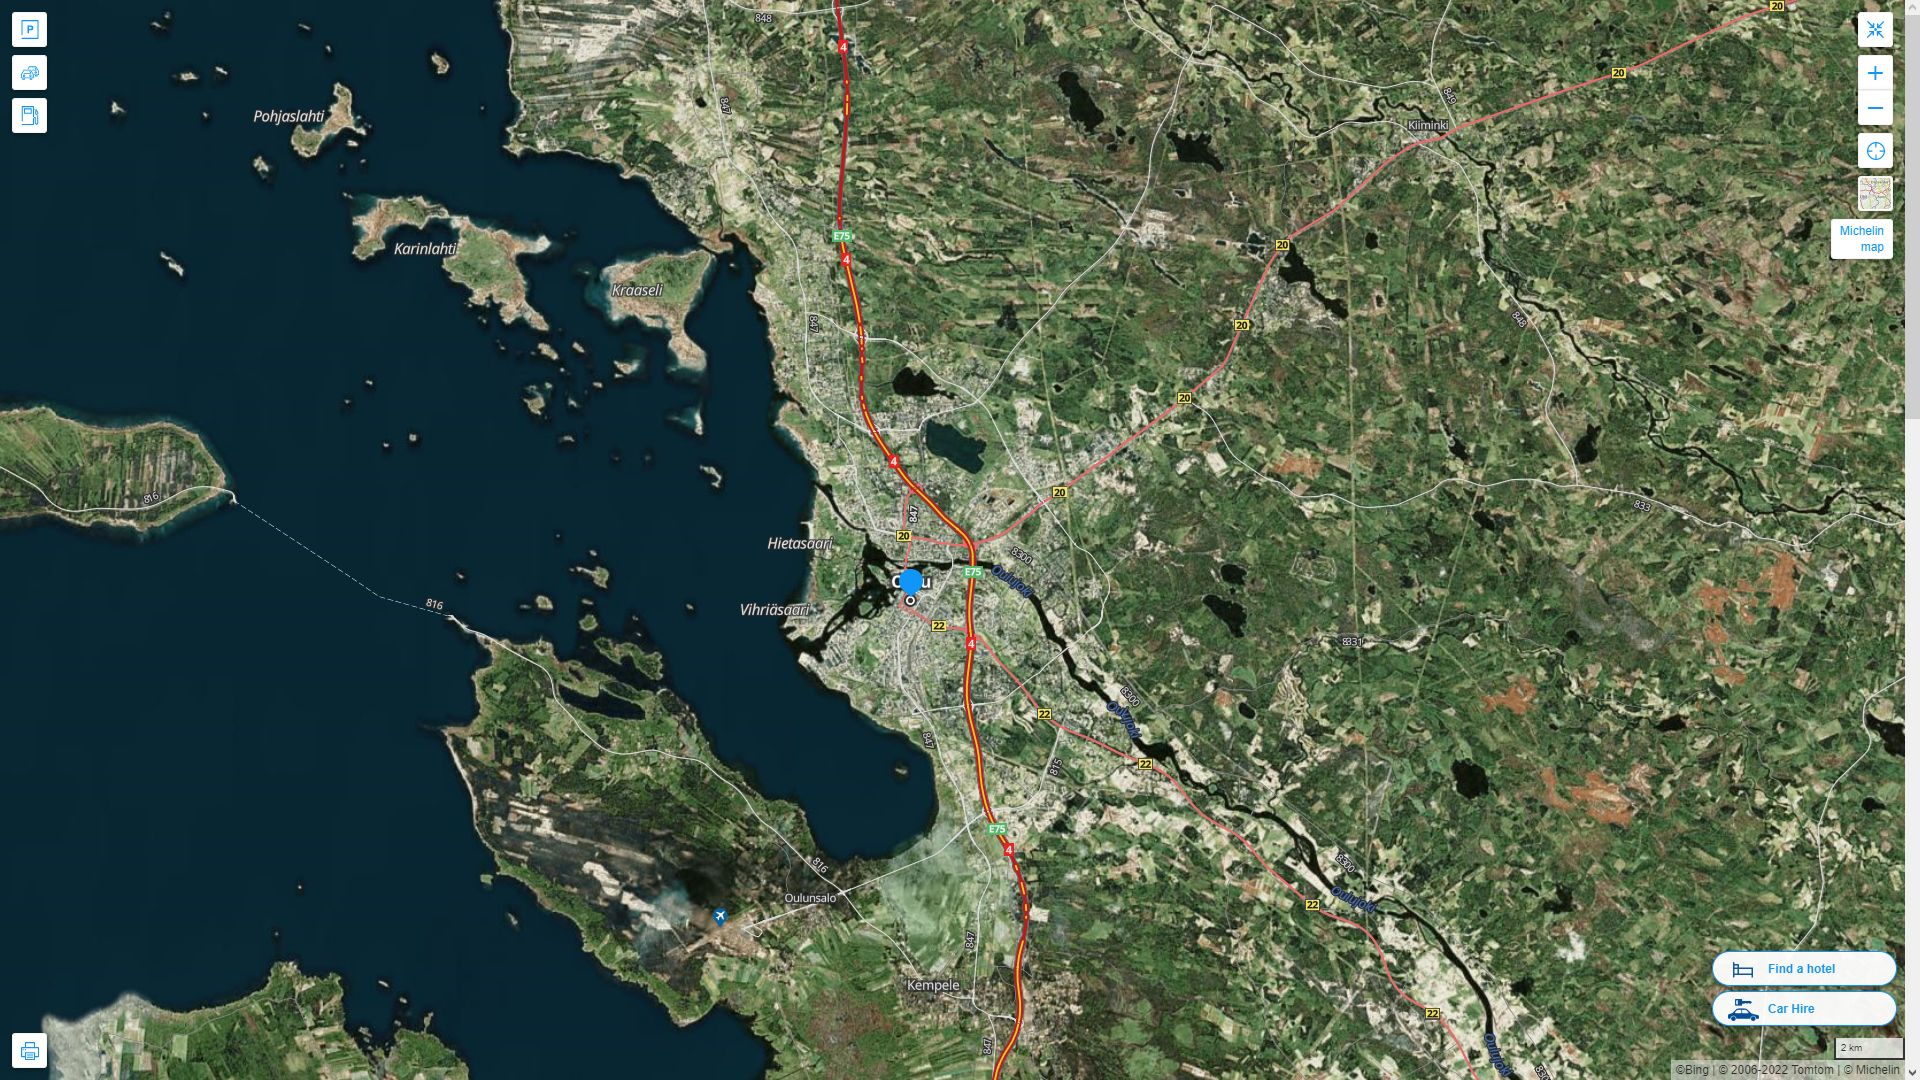 Oulu Highway and Road Map with Satellite View